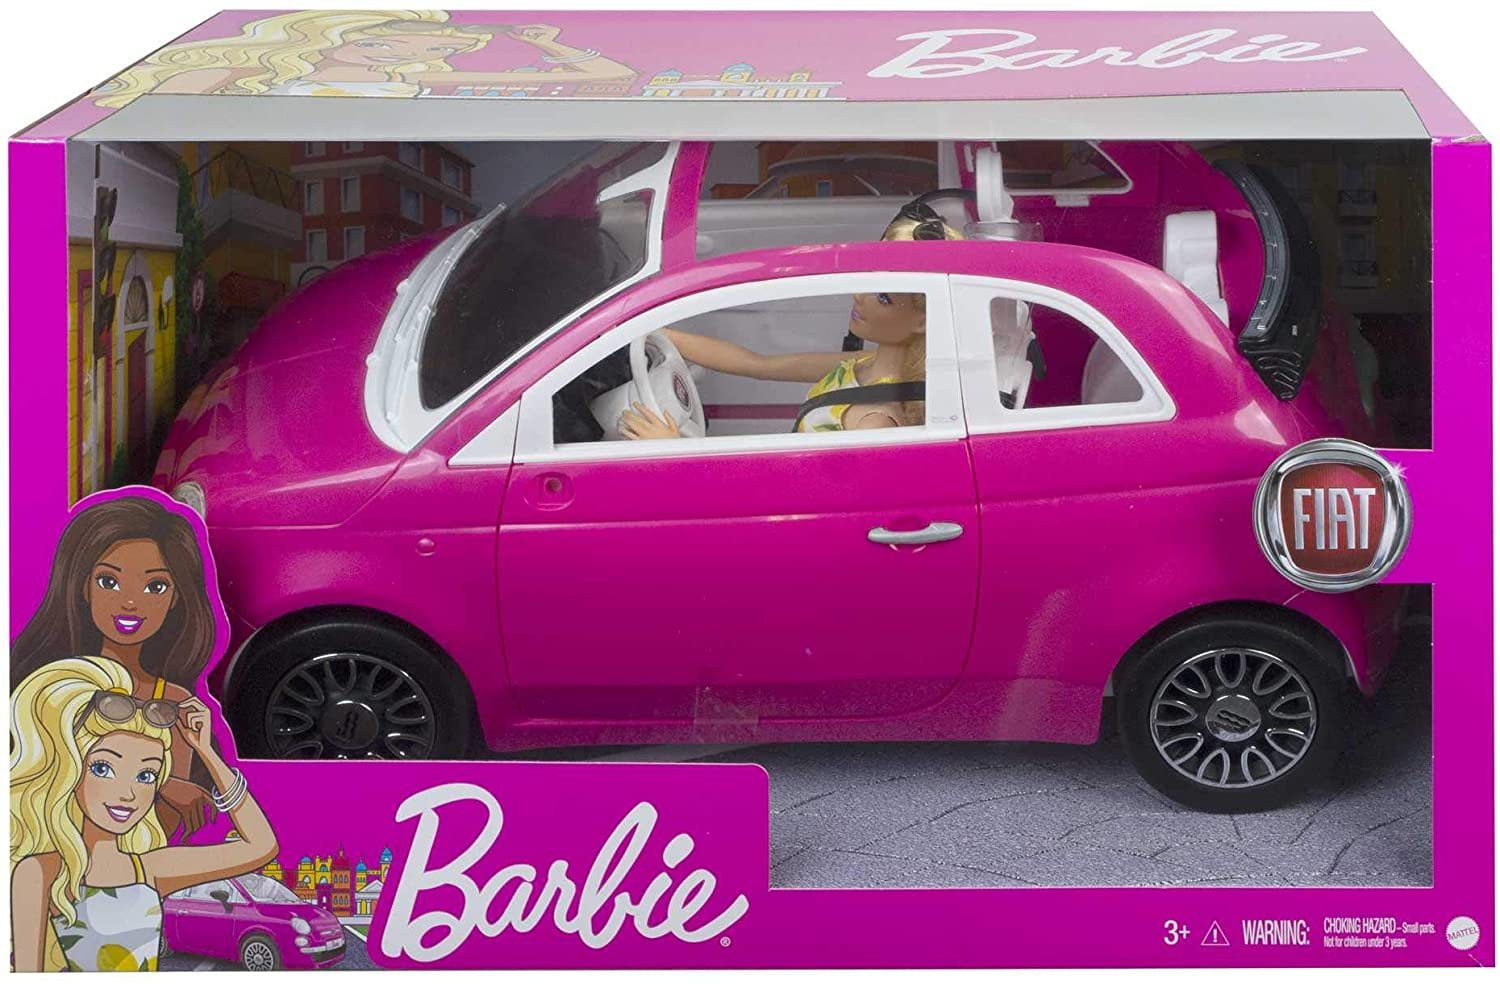 Lot of Barbie and Ken Dolls and Barbie Fiat 500 Car 